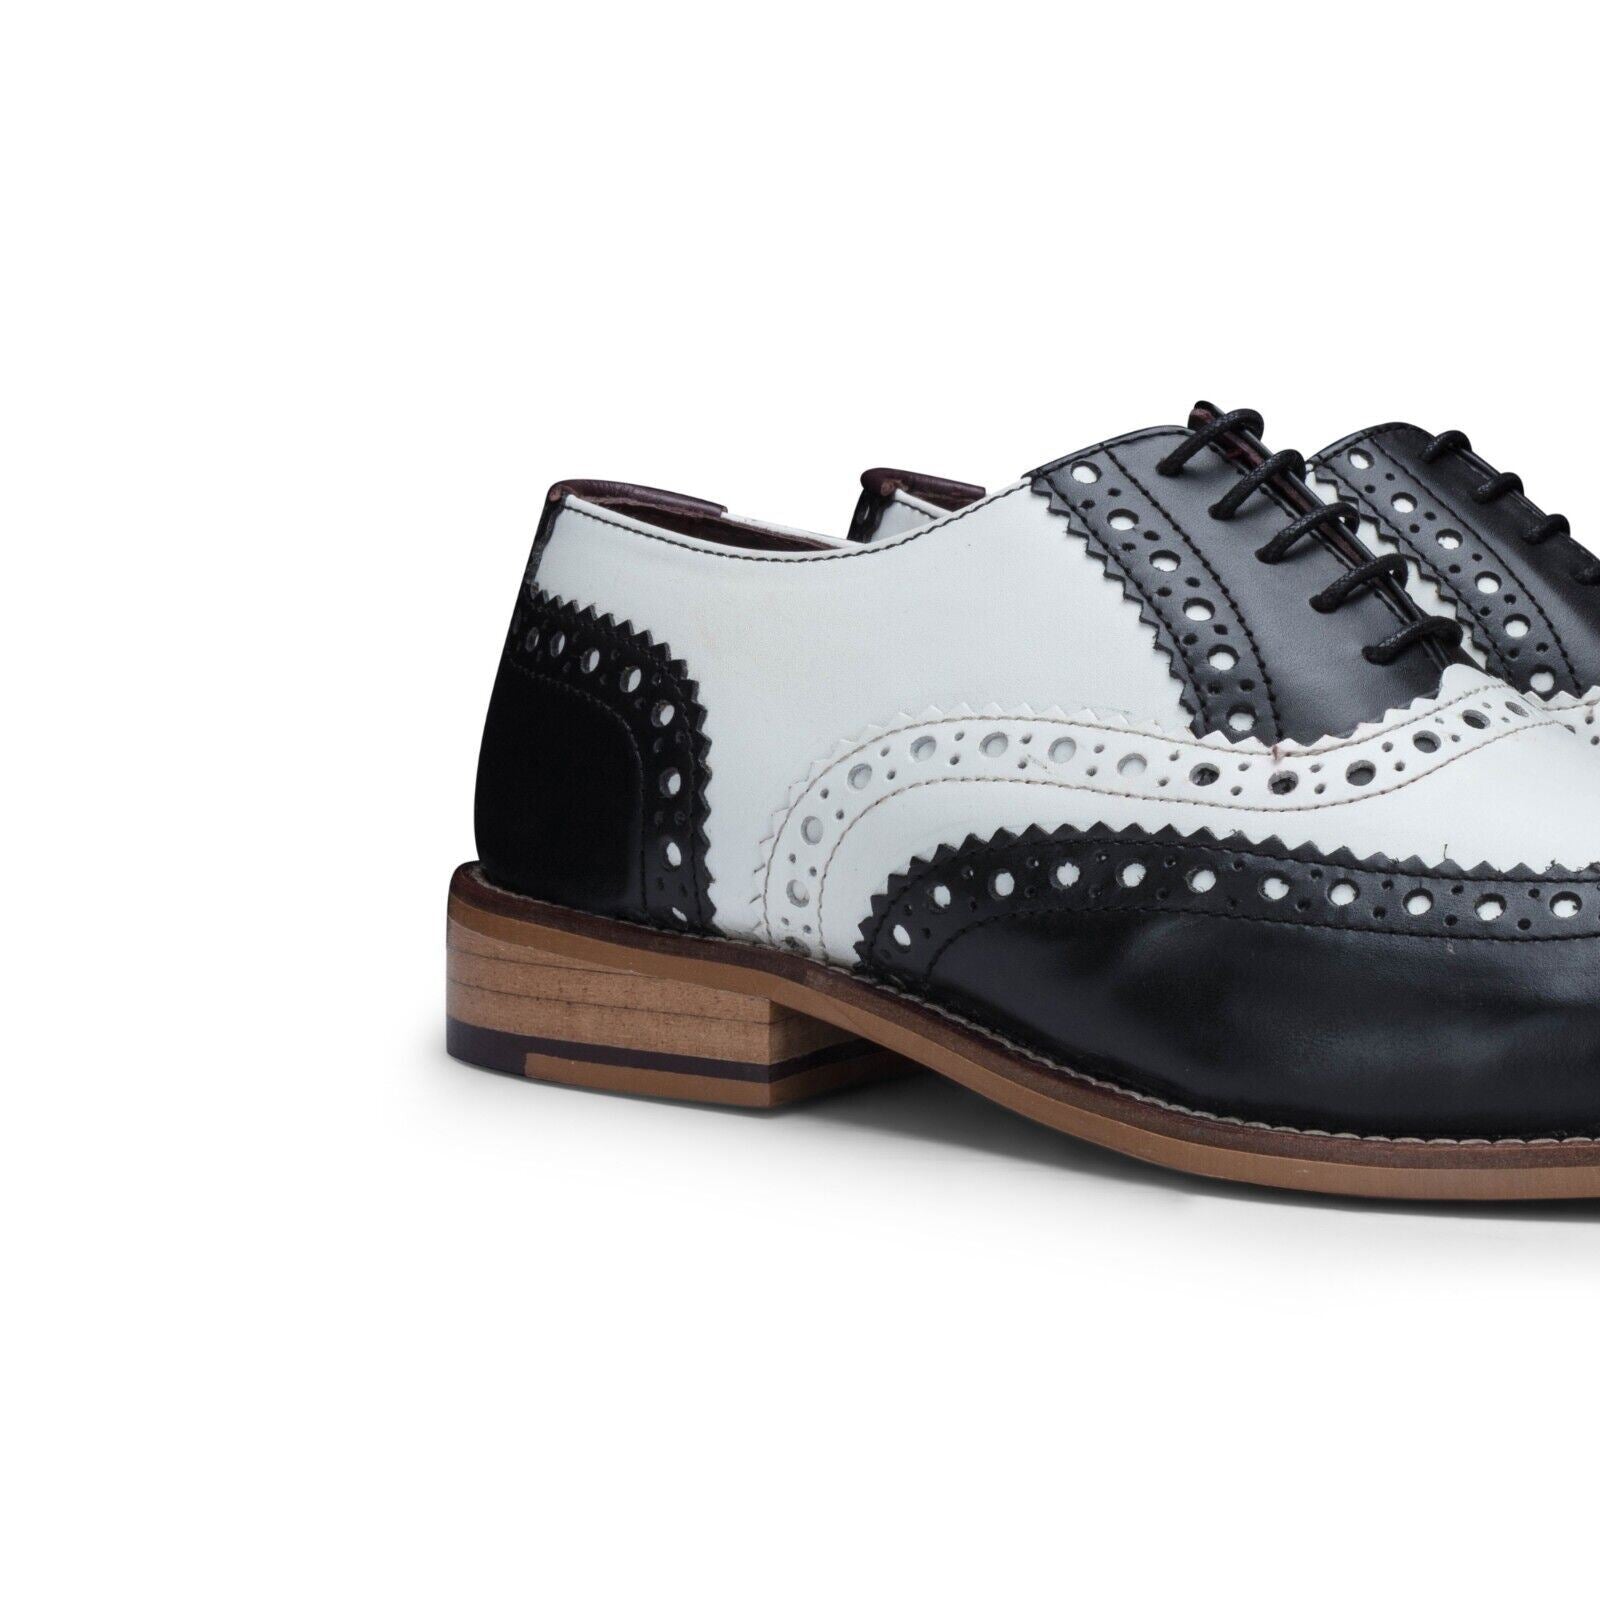 Mens Classic Oxford Black/White Leather Gatsby Brogue Shoes